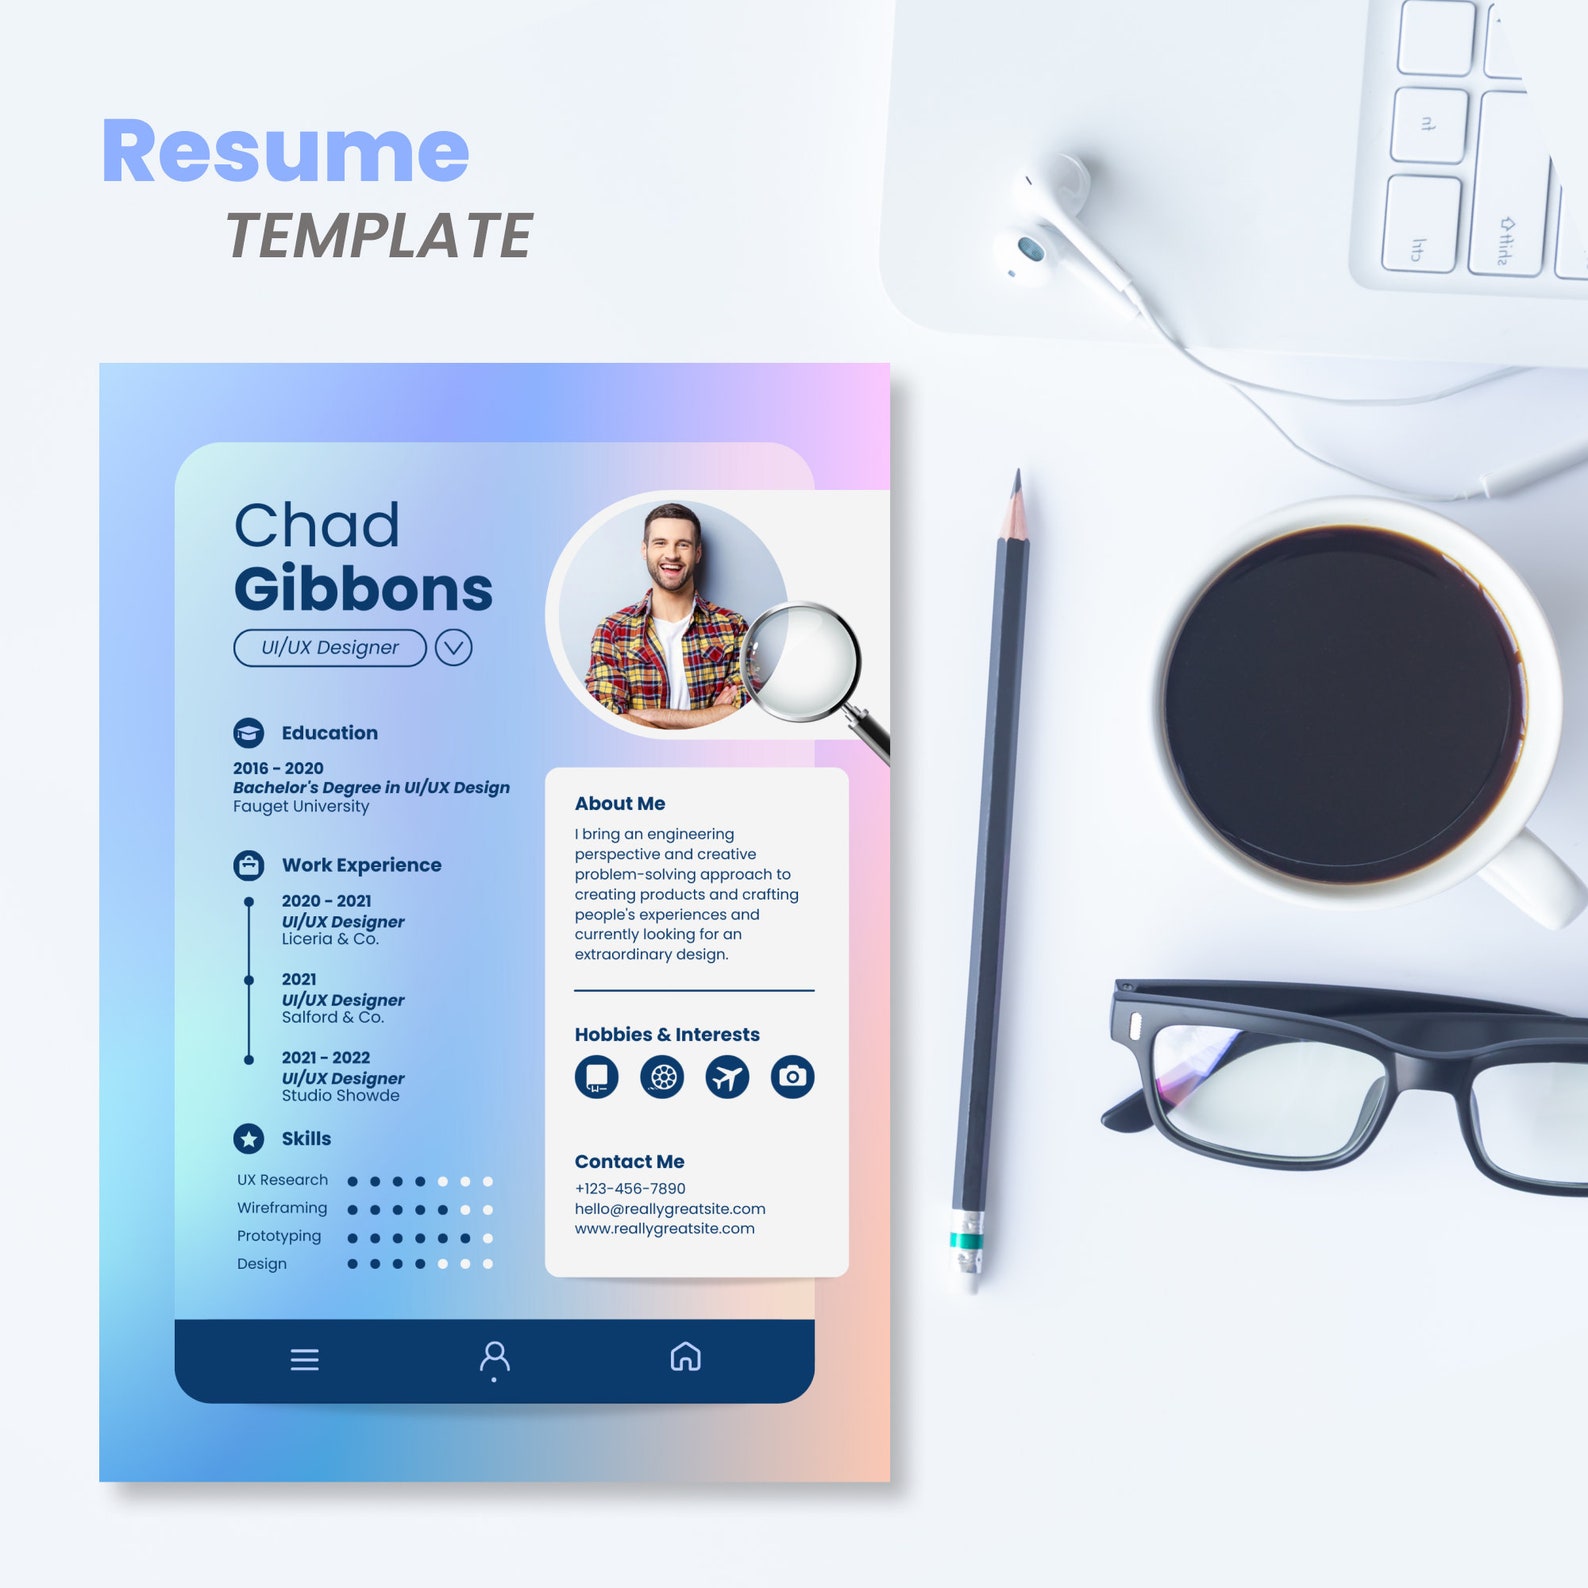 Resume Template Cover Letter and References Template